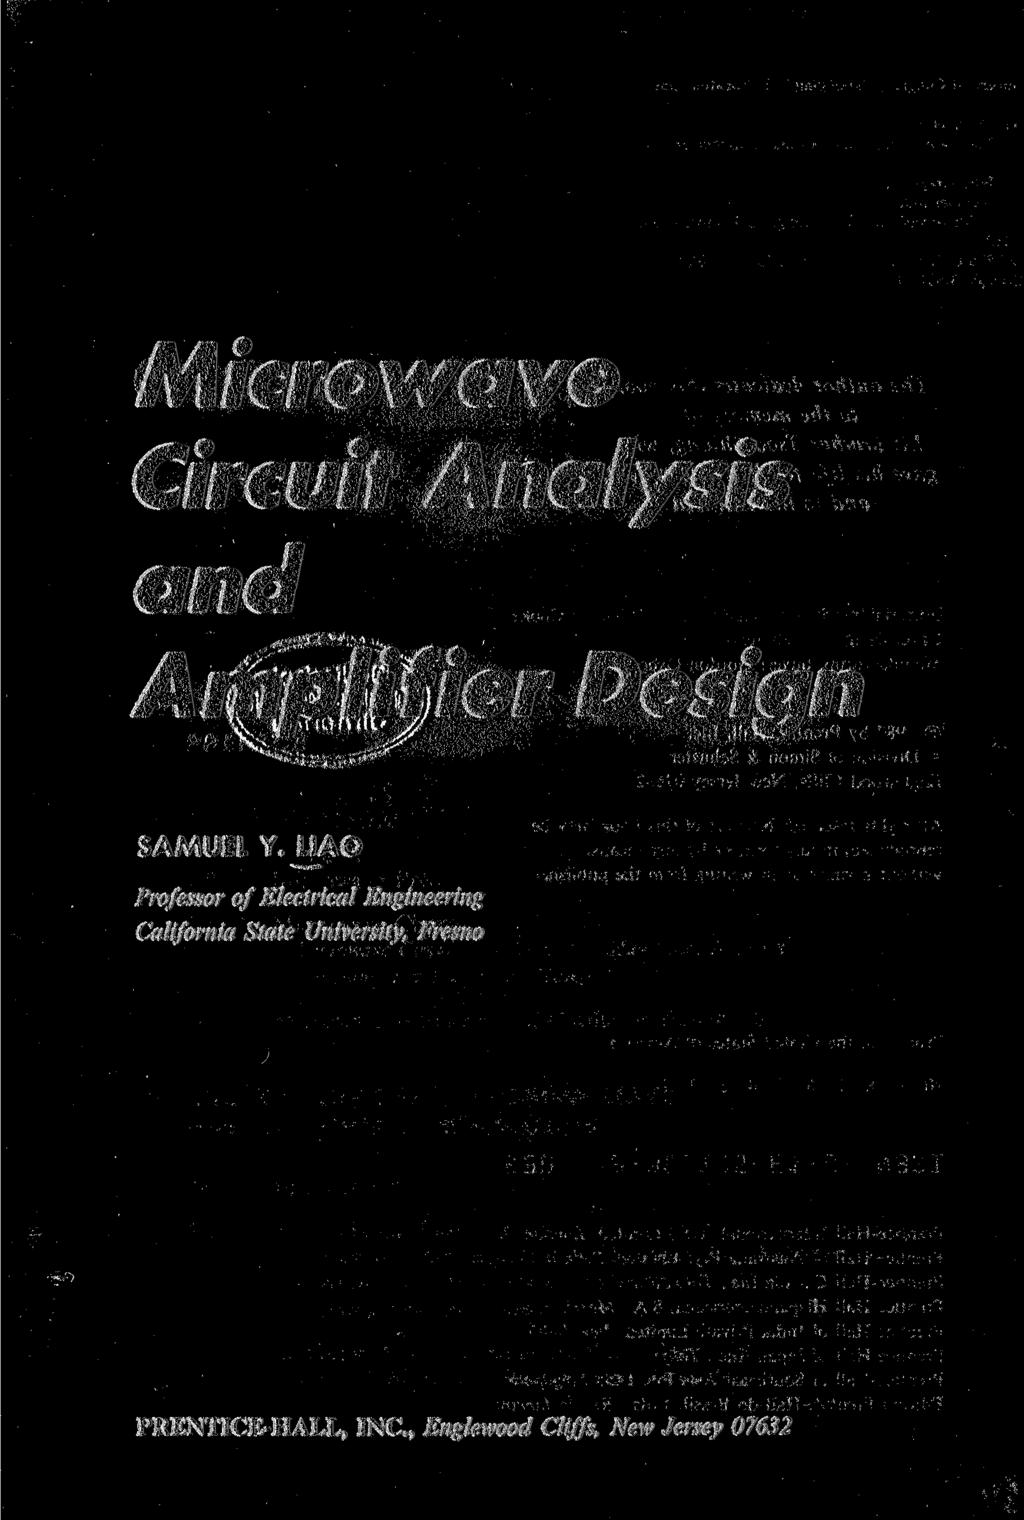 Microwave Circuit Analysis and Amplifier Design SAMUEL Y.